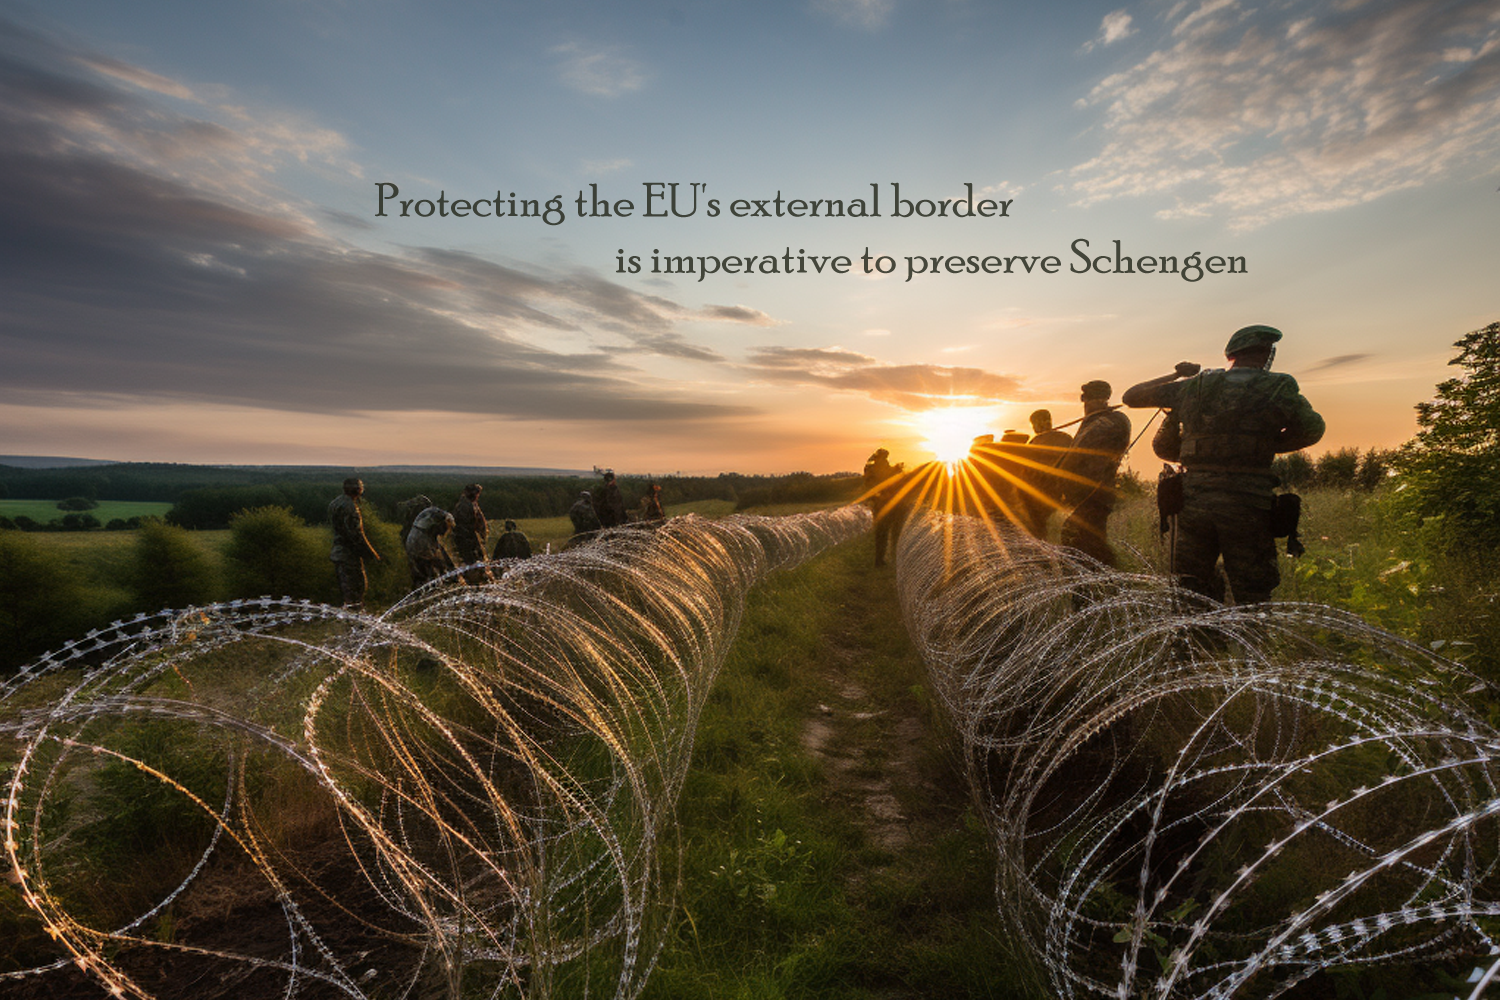 Protecting the EU's external border is imperative to preserve Schengen.